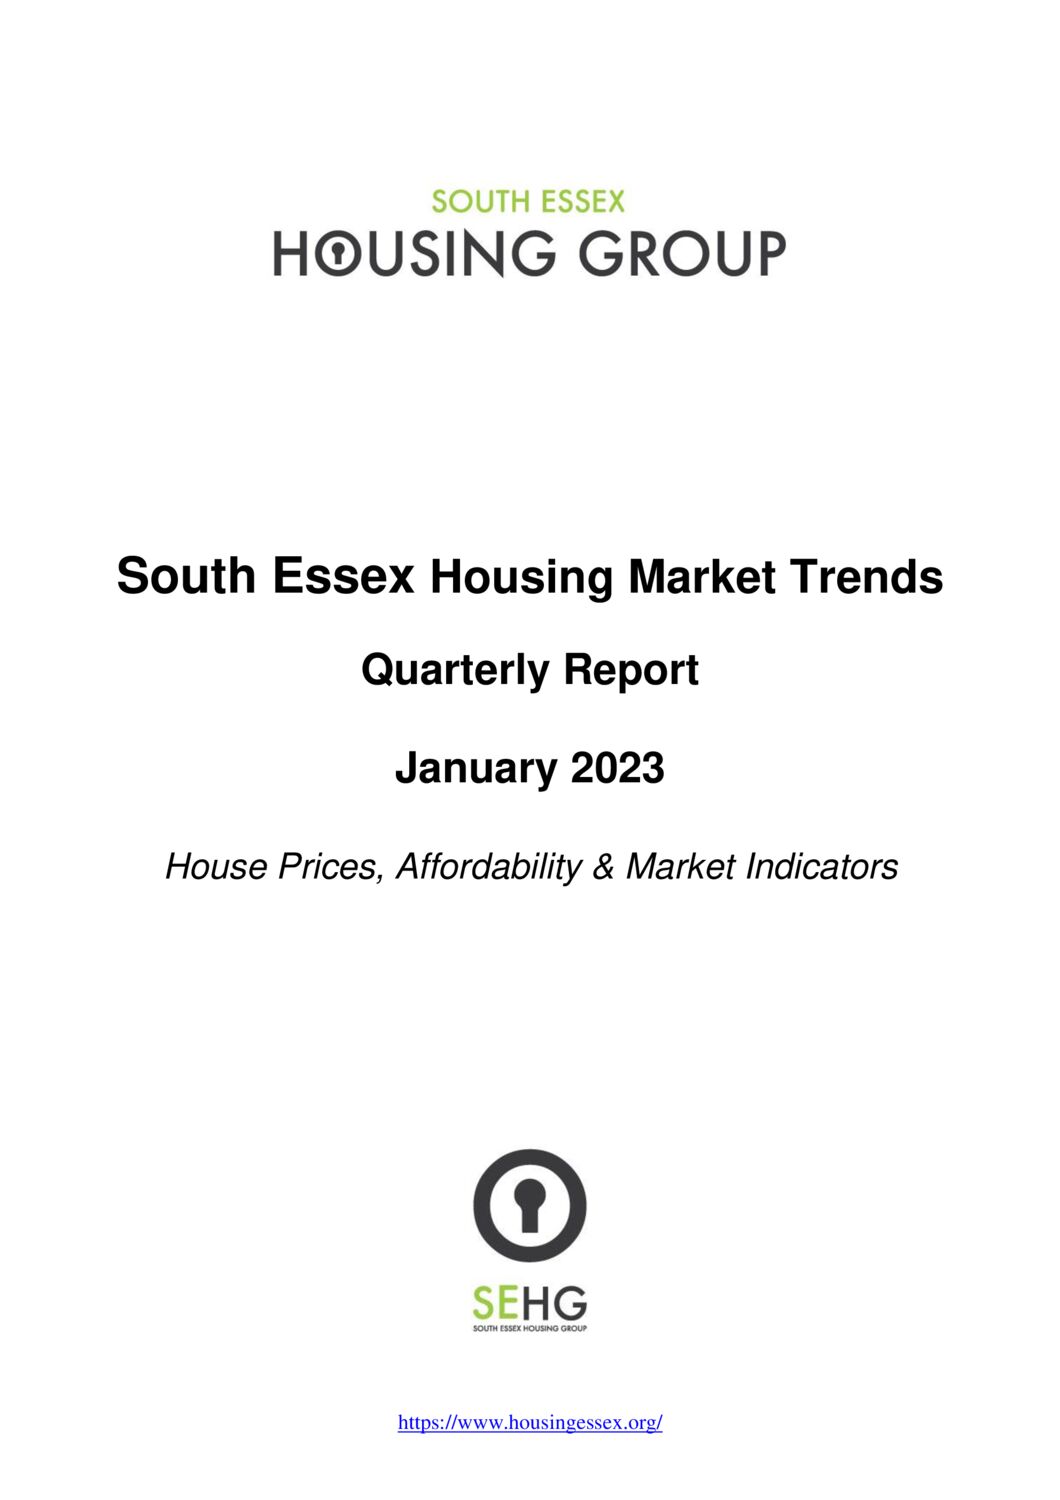 South Essex Housing Market Trends Report January 2023